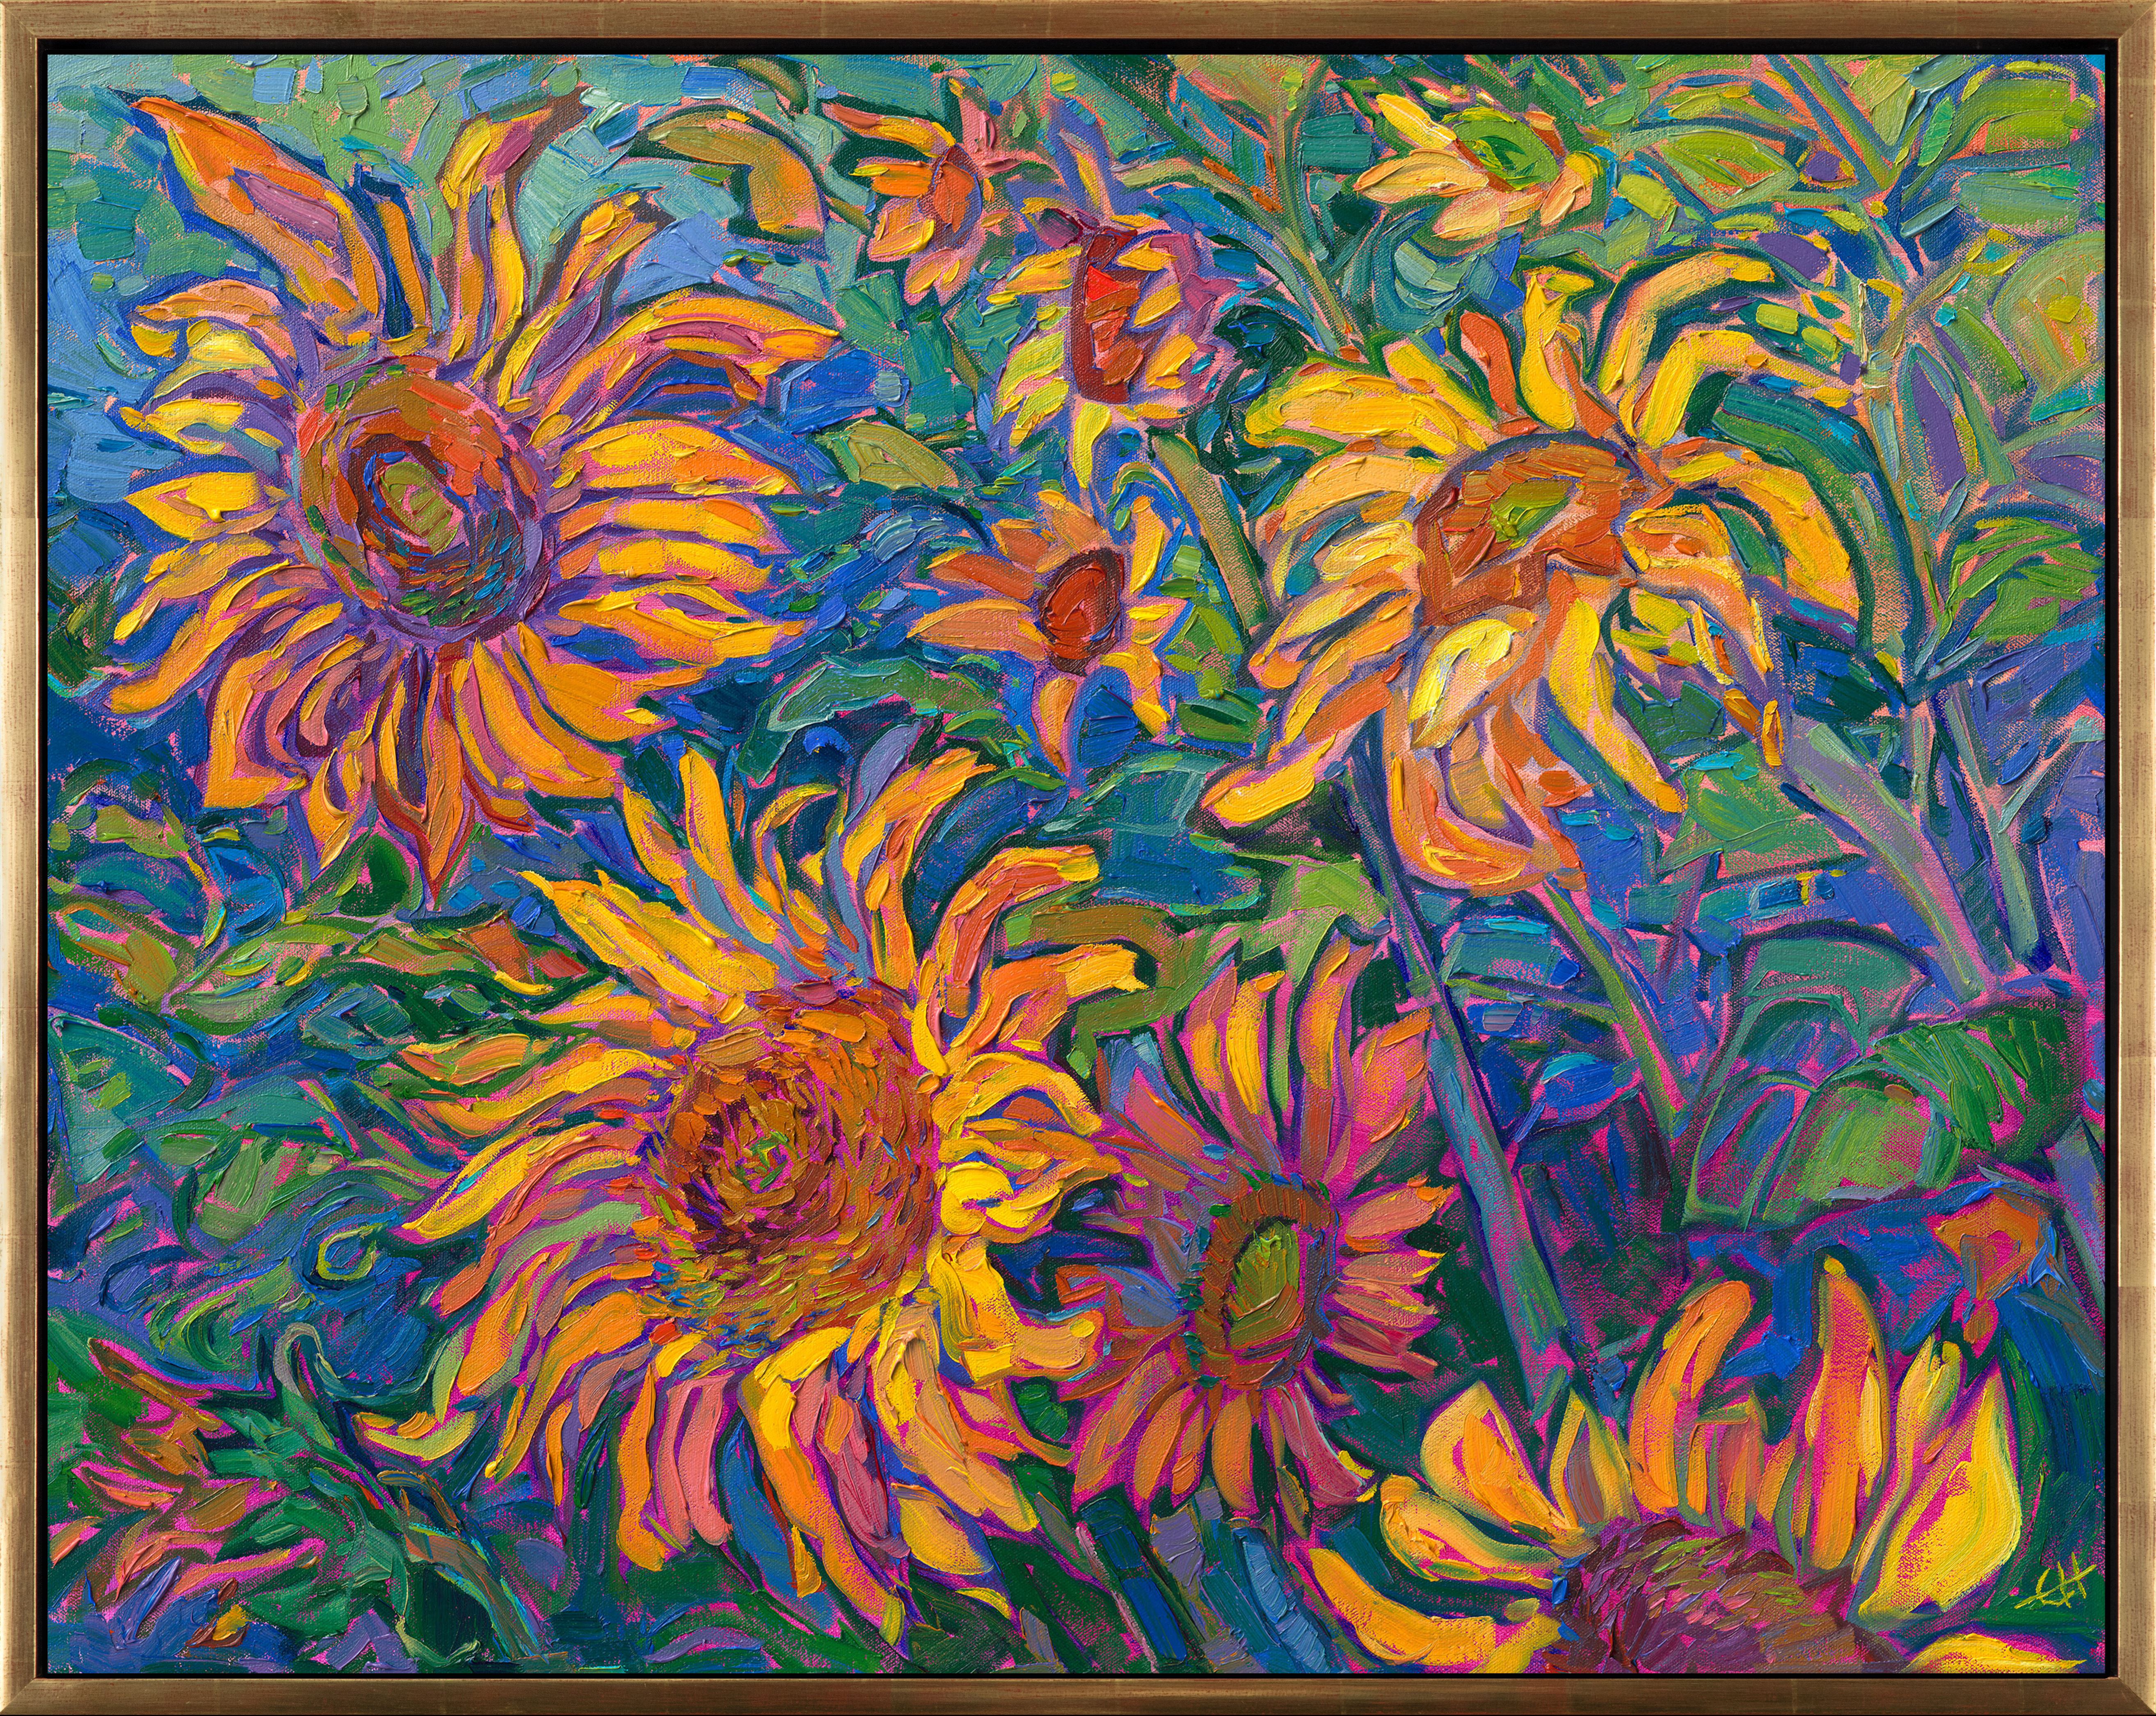 Impressionism vs Expressionism The term &ldquo;impressionism&rdquo; often conjures images of van Gogh&rsquo;s sunflowers, Monet&rsquo;s waterlilies, and luncheons with Renoir. On the other hand, the first painting most people think about when hearing &ldquo;expressionism&rdquo; is  The Scream  by Edvard Munch. Other classic expressionist paintings like  Der Blaue Reiter&nbsp; by Kandinsky and  Large Blue Horses&nbsp; by Marc showcase expressive movement and brilliant color. These expressionist works and many others evoke emotion through movement, color, and style. &nbsp; &lt;READ MORE&gt; 